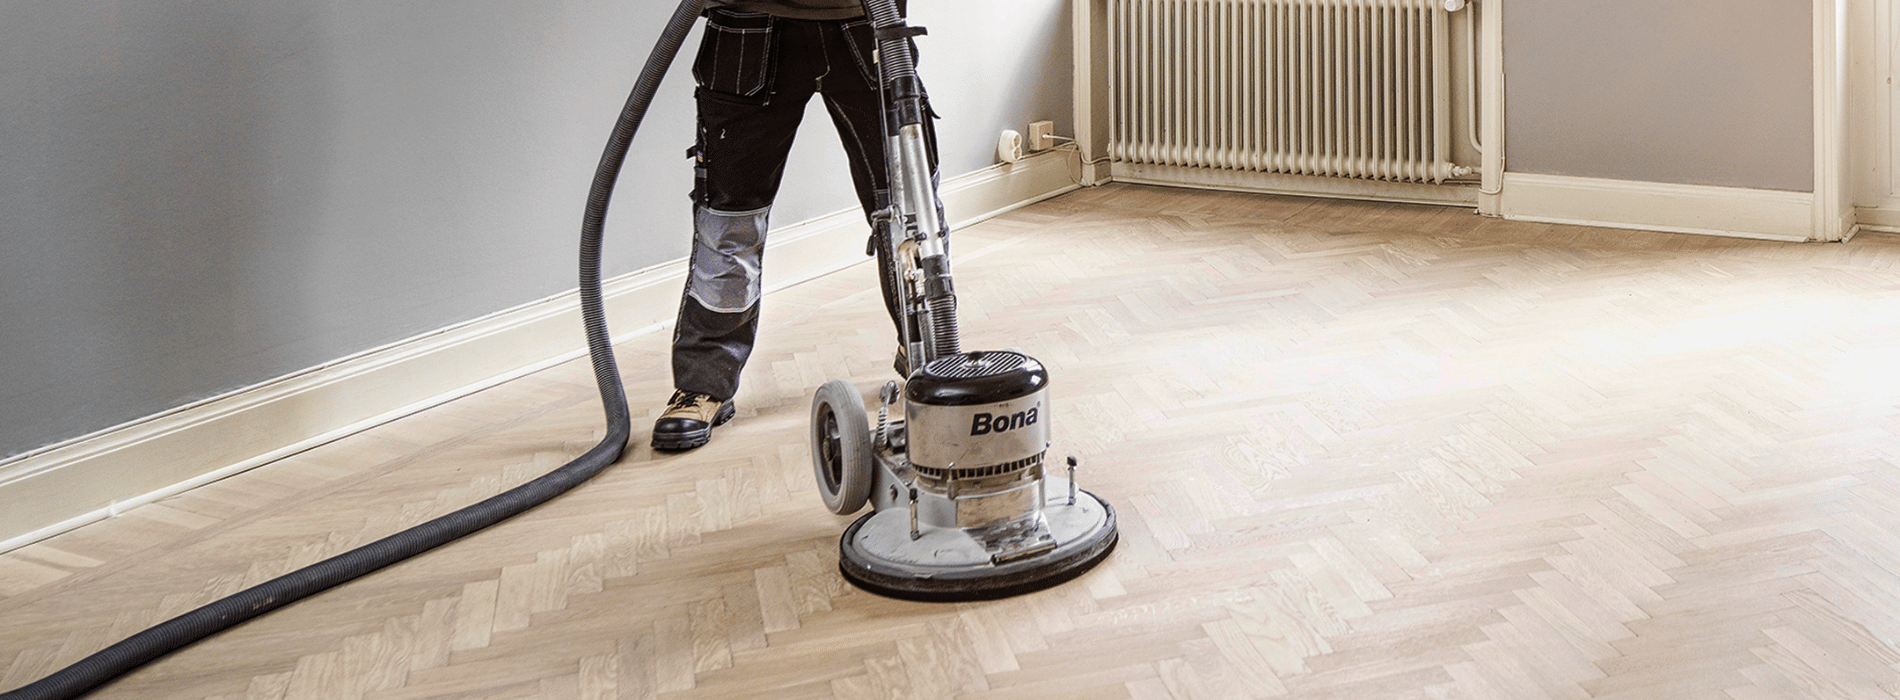 In Elephant & Castle, SE17, Mr Sander® use the powerful Bona FlexiSand 1.9 buffer sander, equipped with a Ø 407 mm dimension and an impressive 1.9 kW effect. With a voltage of 230 V and a frequency of 50 Hz/60 Hz, our dust extraction system with a HEPA filter ensures a clean and efficient result. 